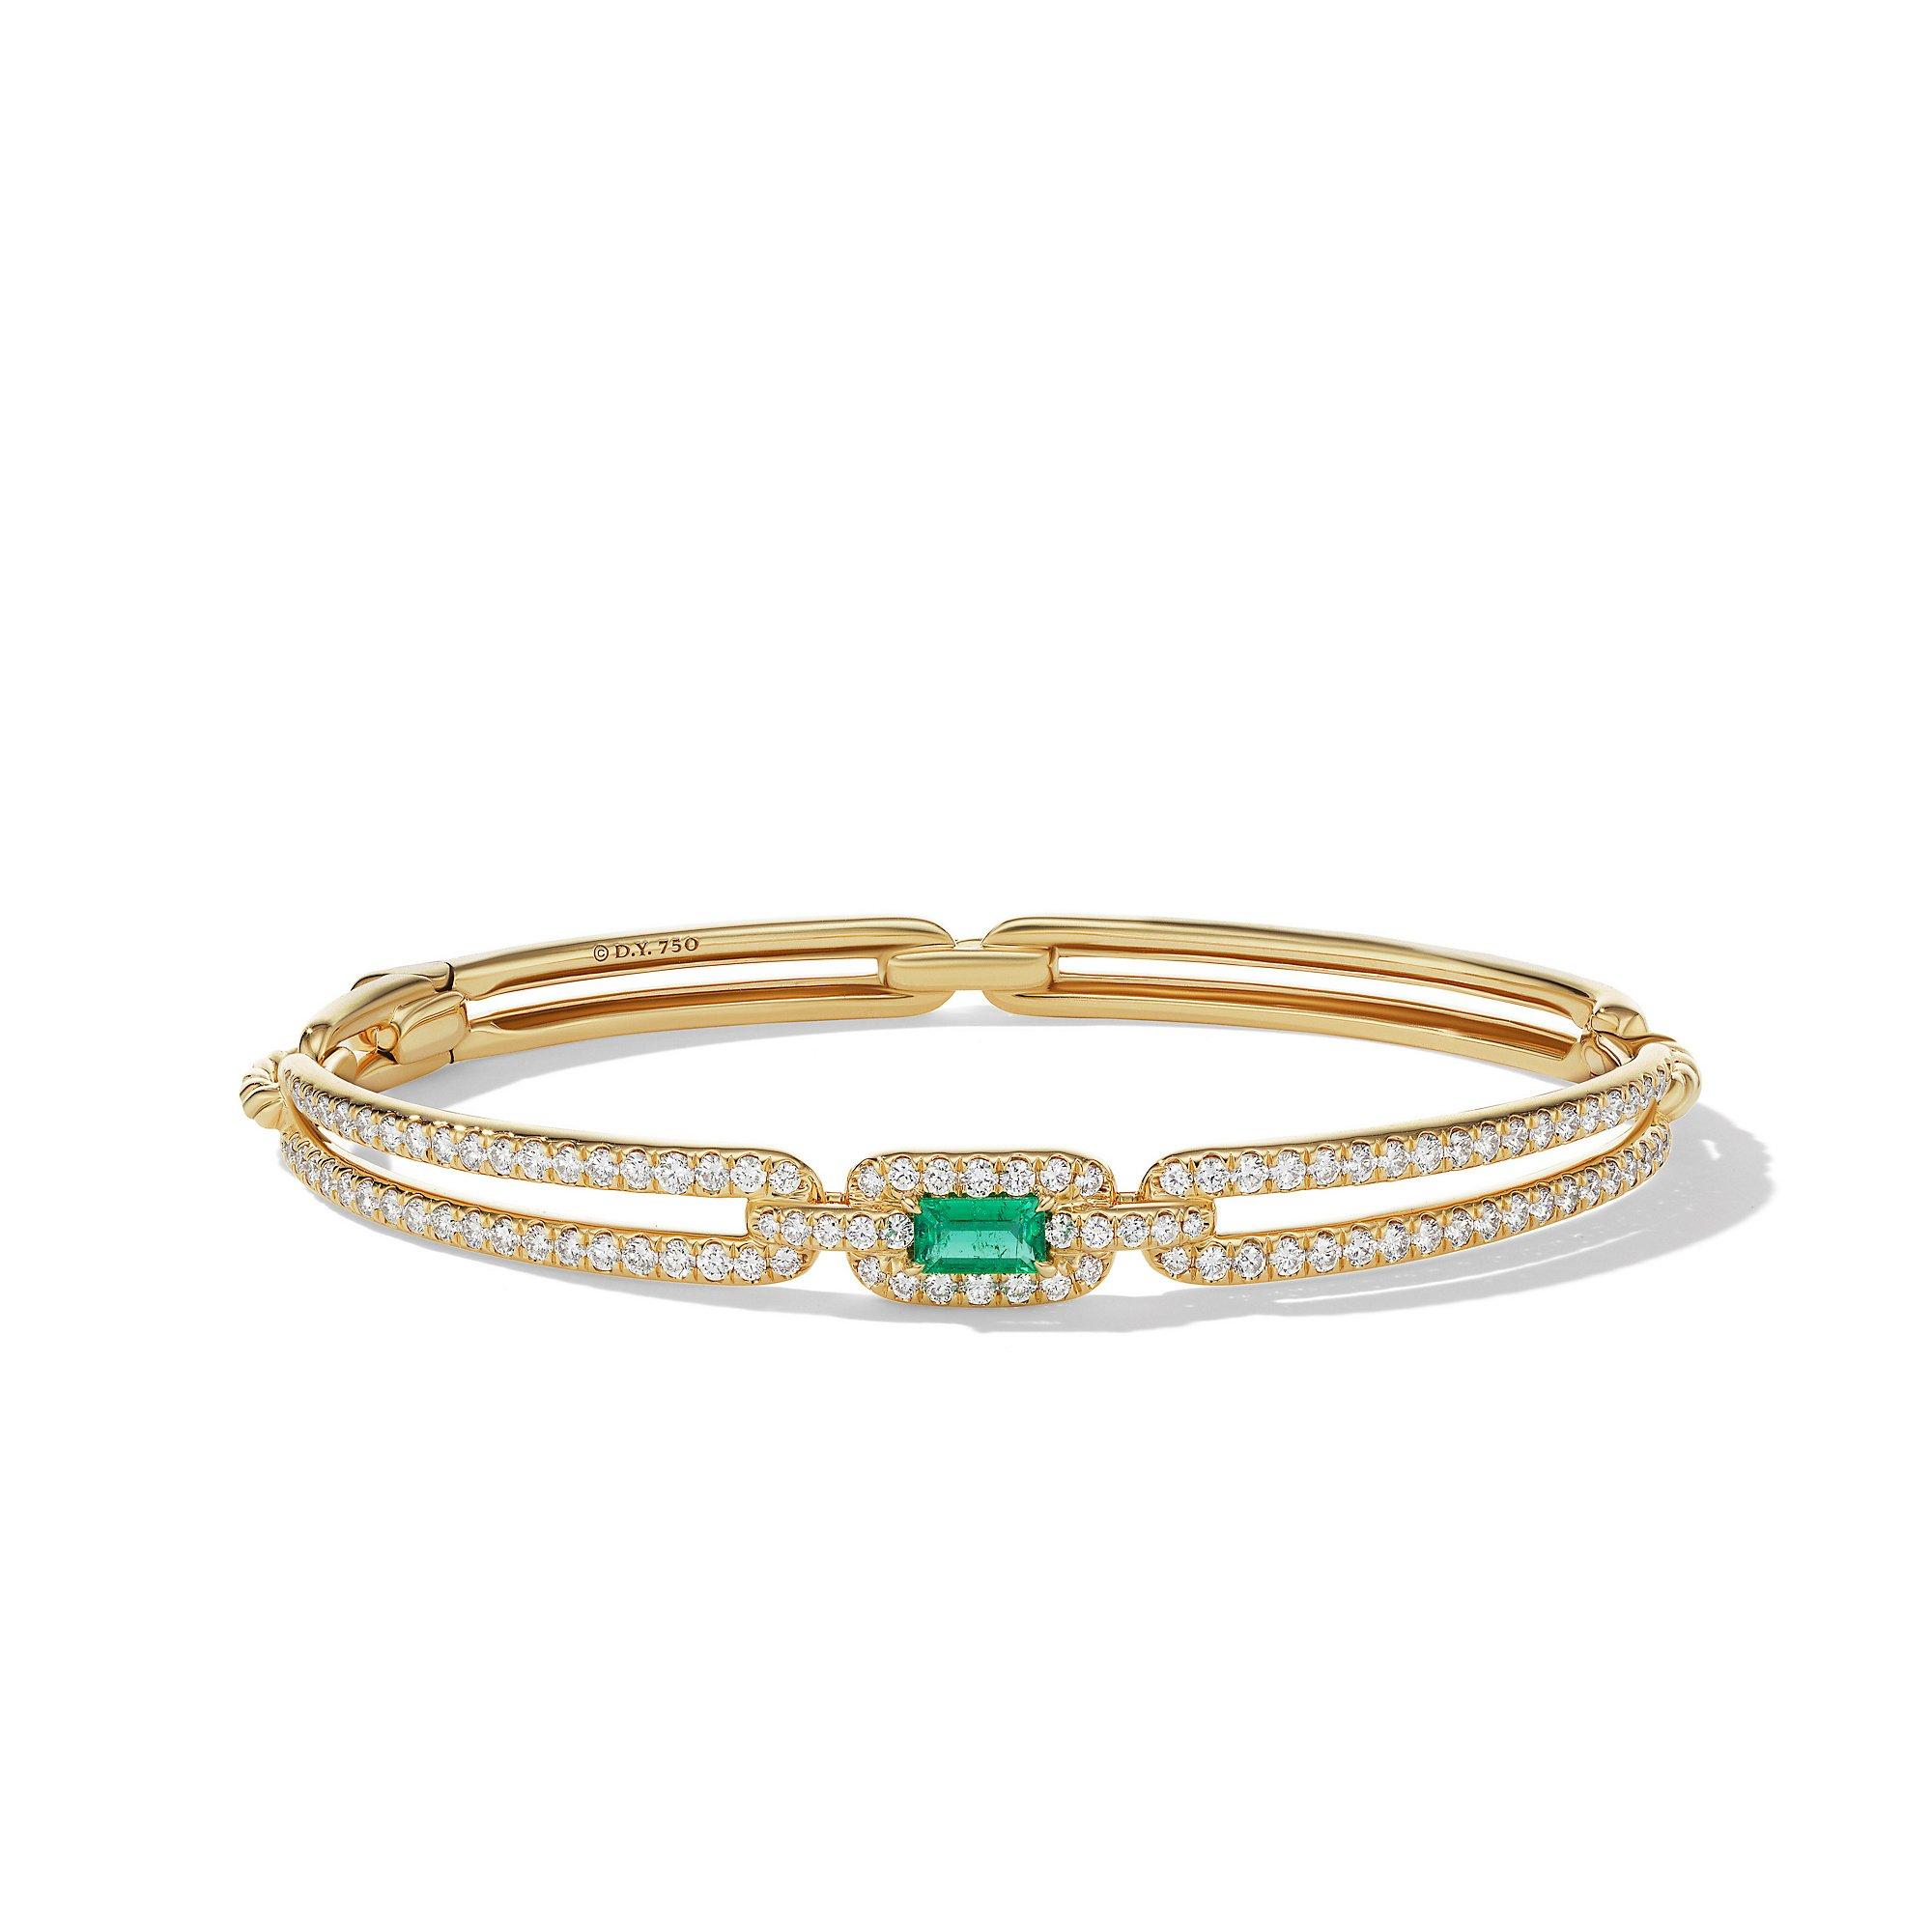 David Yurman Stax Single Link Bracelet in 18k Yellow Gold with Emerald and Pave Diamonds